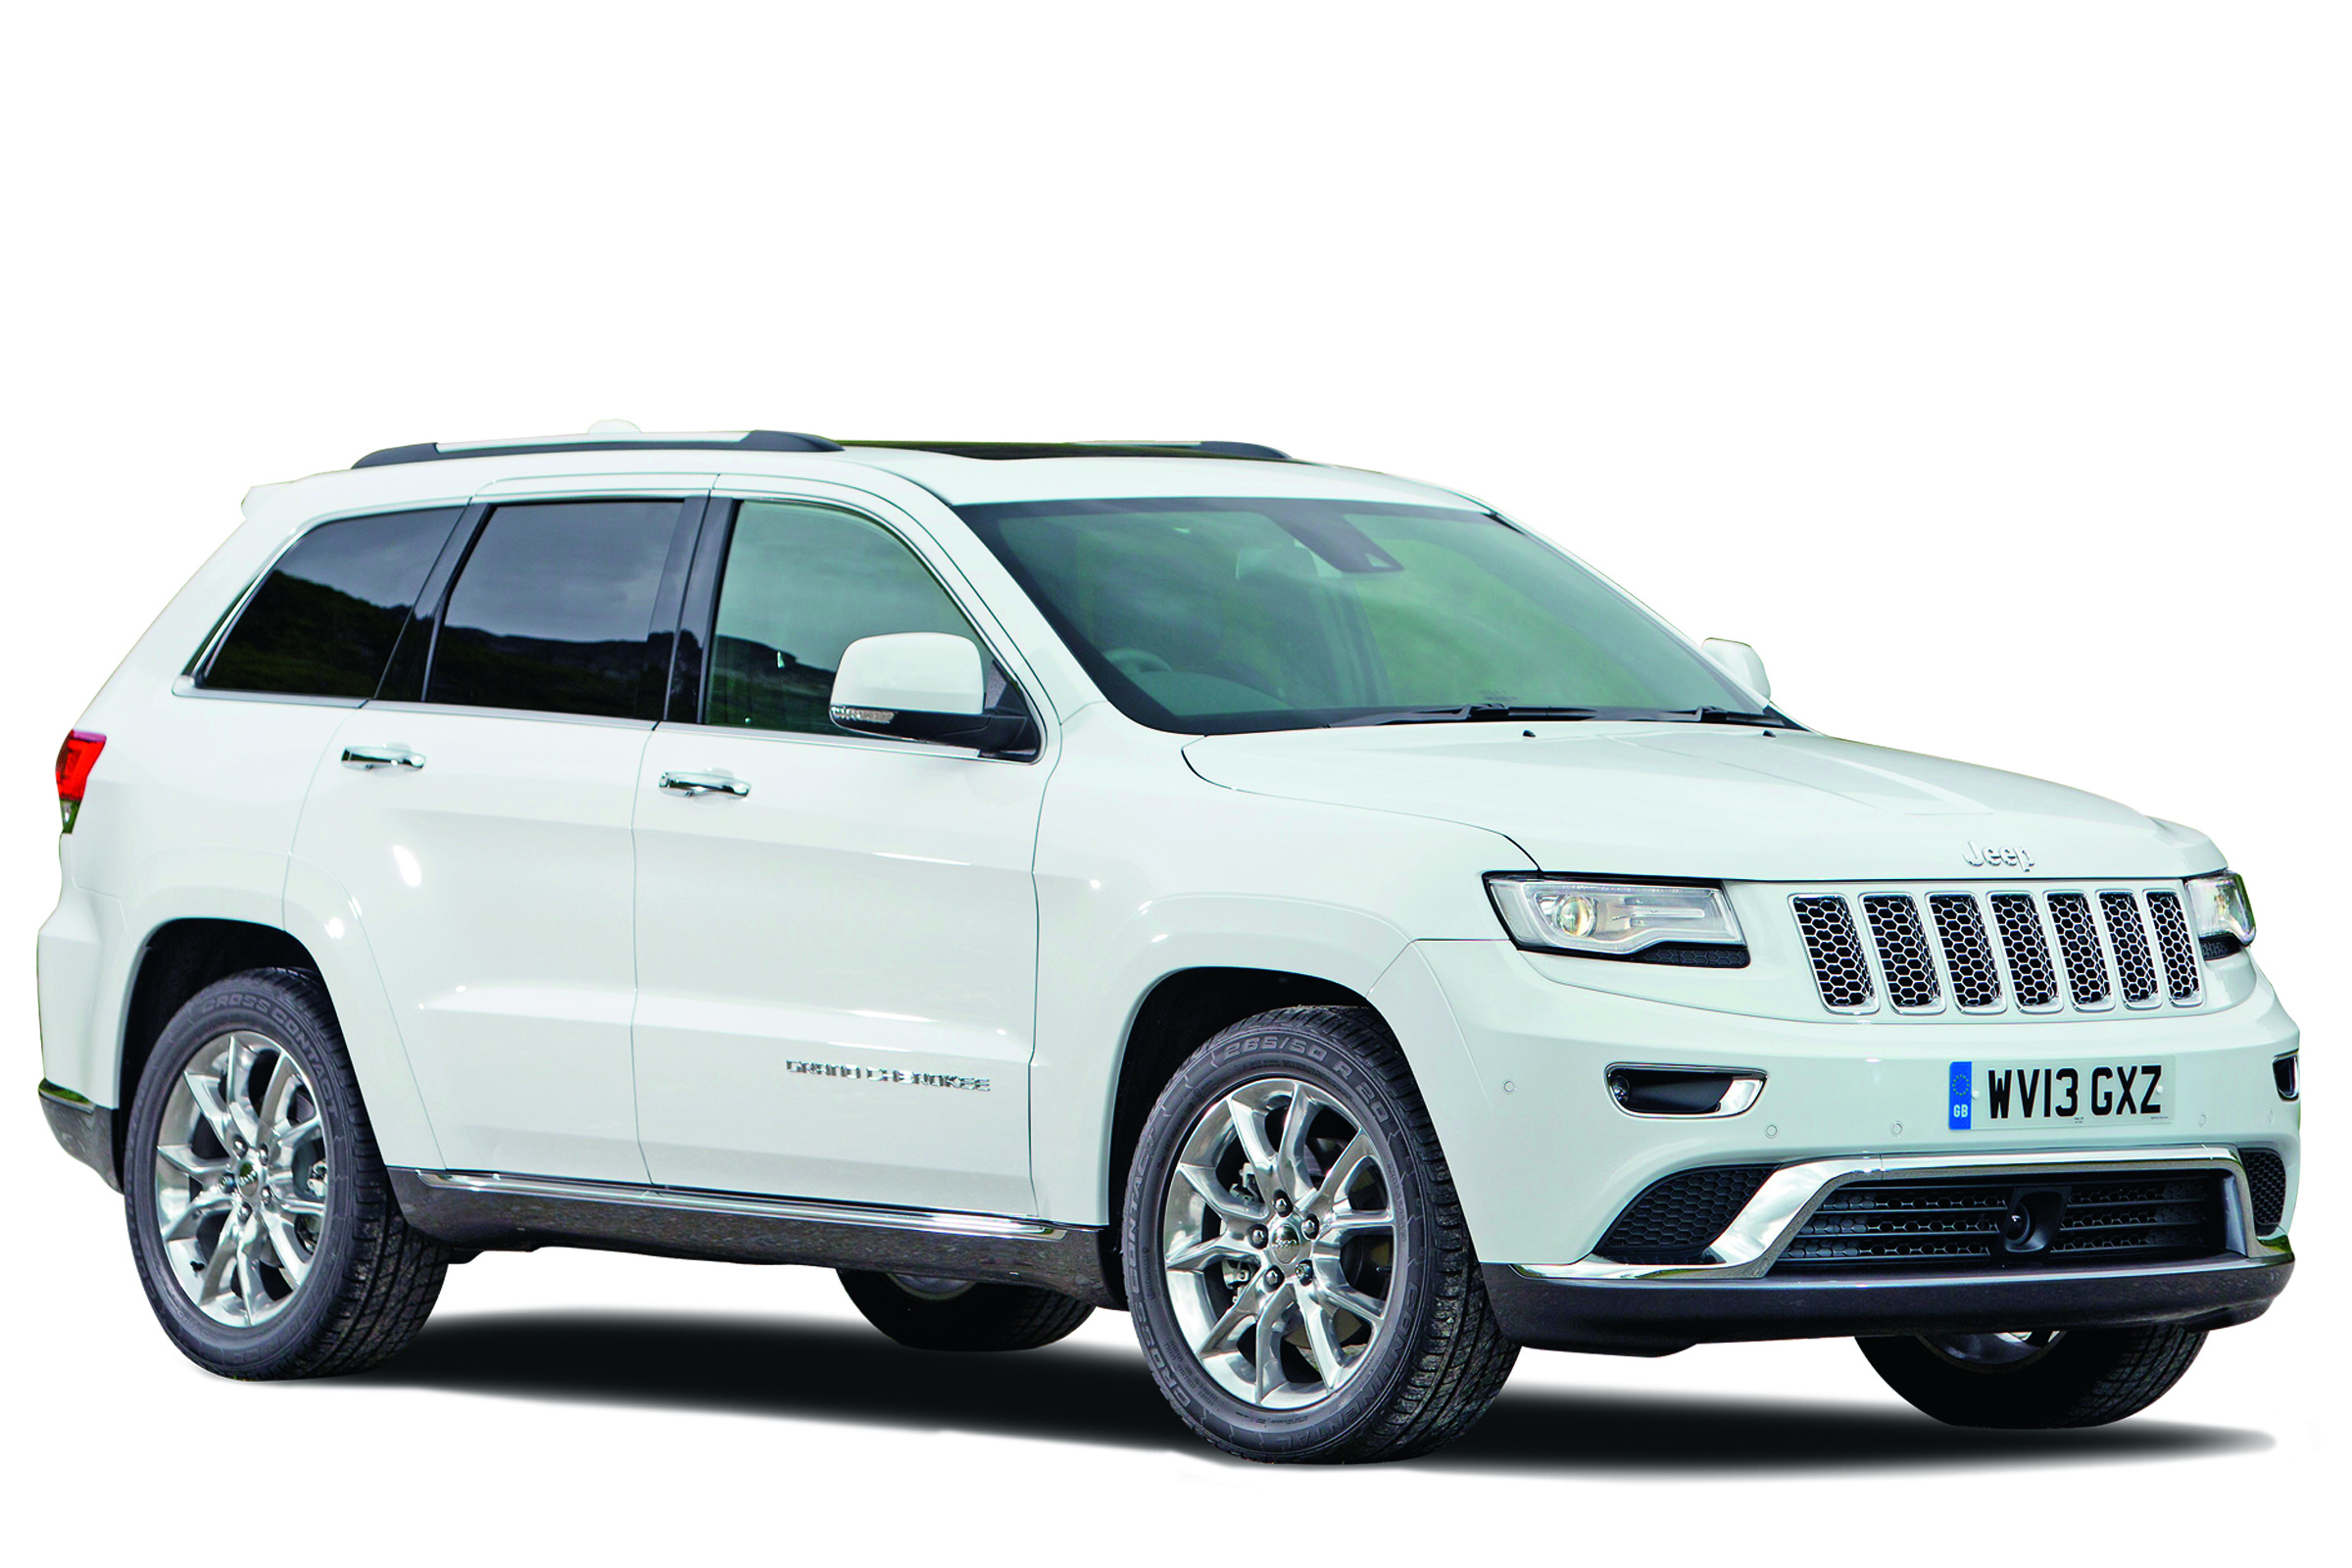 Jeep Grand Cherokee Owner Reviews MPG, Problems